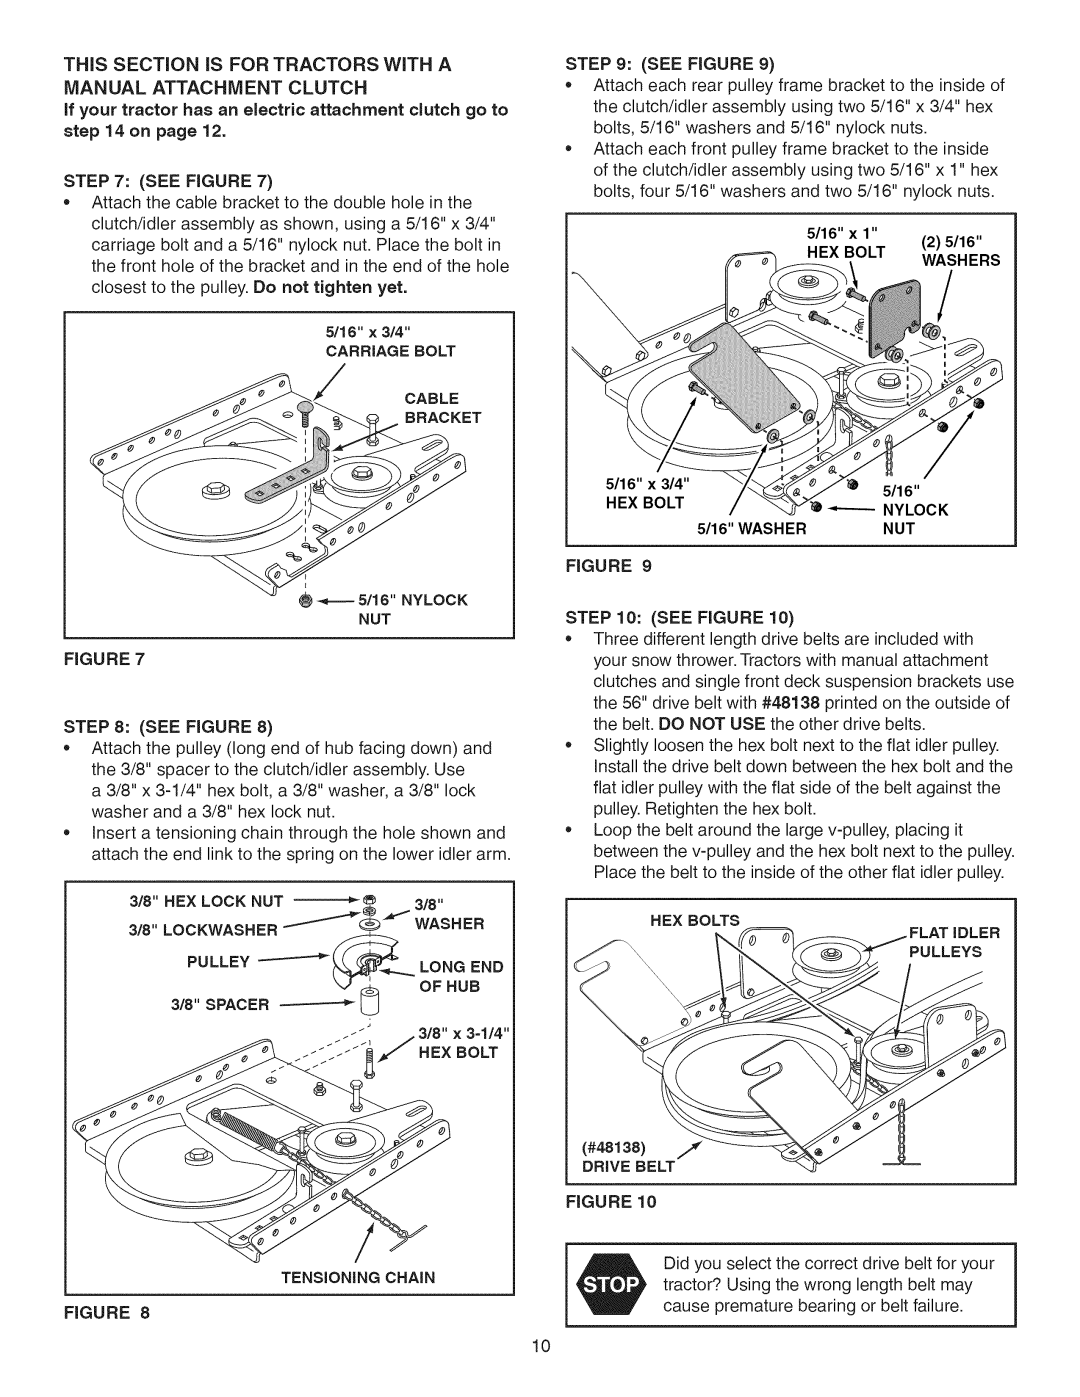 Craftsman 486.24837 manual #46136, This Section Is For Tractors With A, 5/16 x 2 5/16 HEX BOLT WASHERS, Drive Belt 